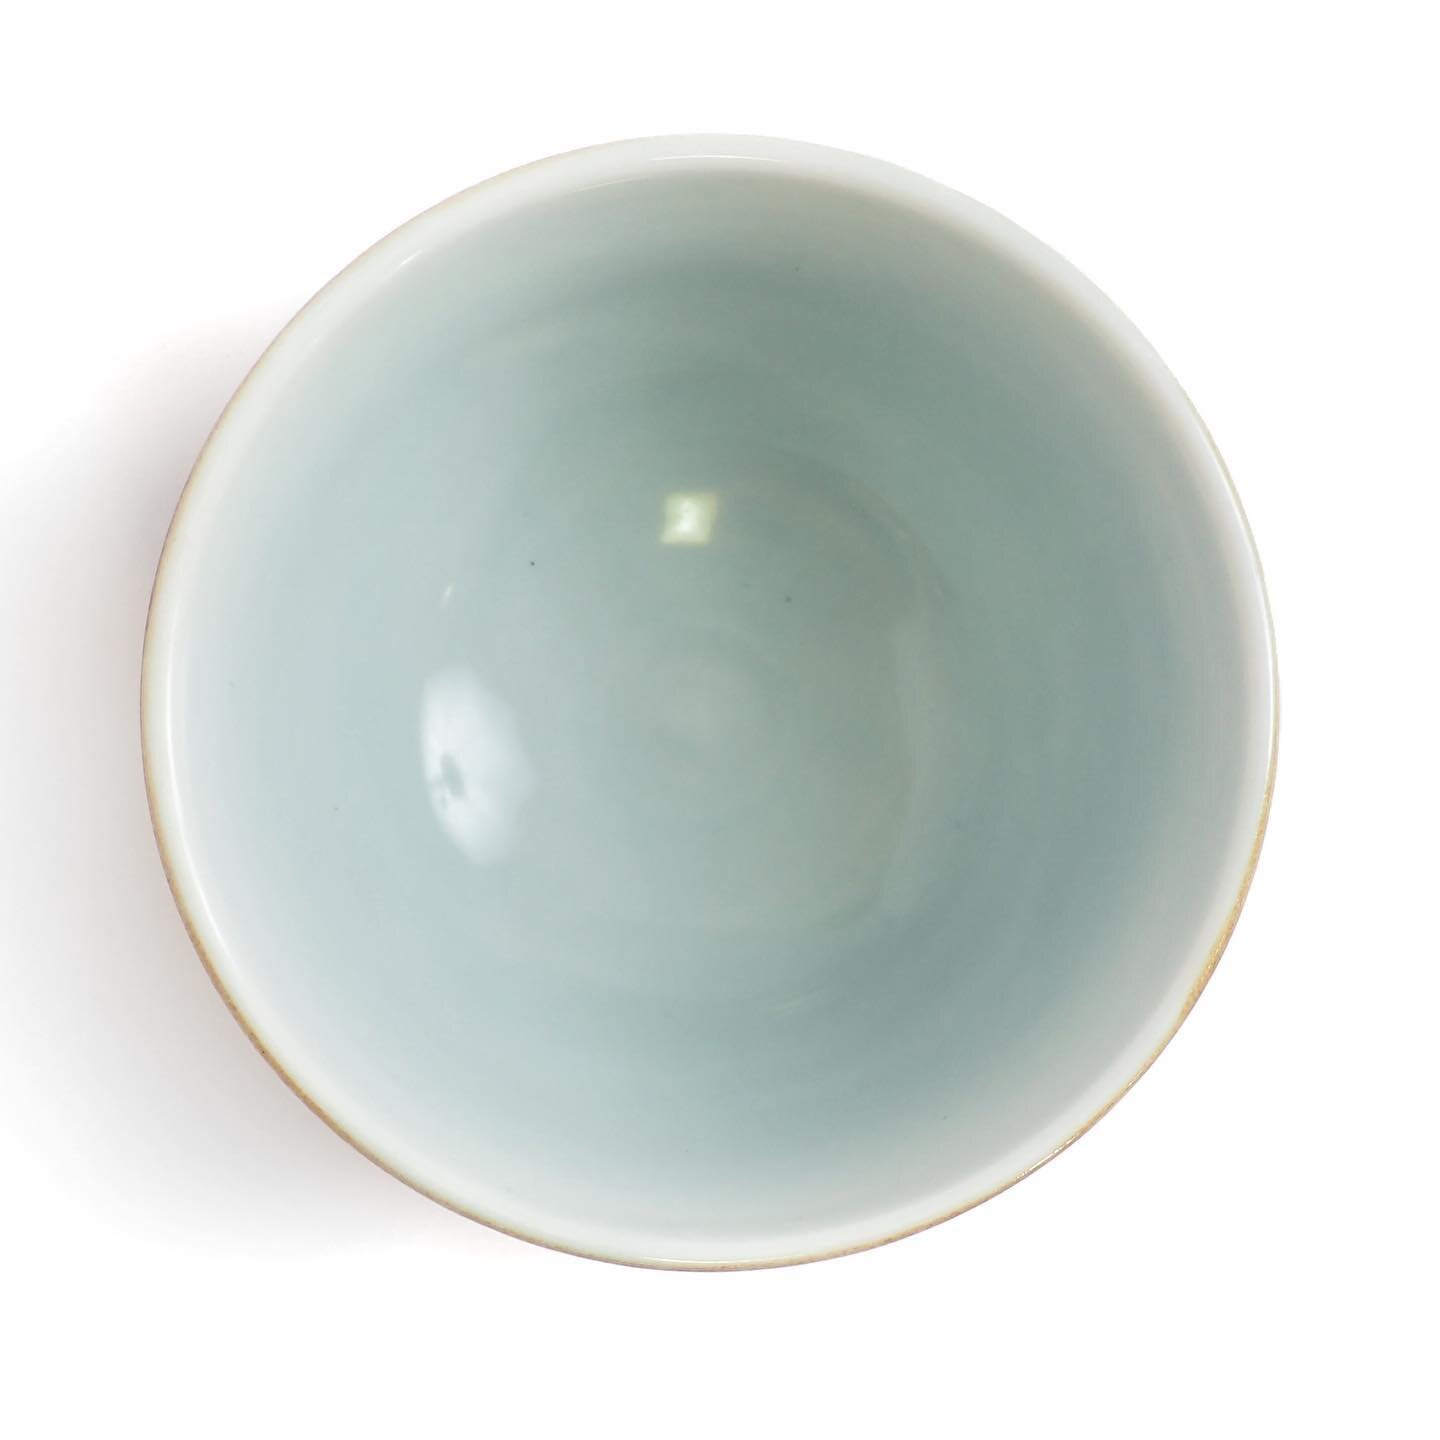 It took a lot of testing, but I finally got a celadon I&rsquo;m happy with. Here it is on porcelain.